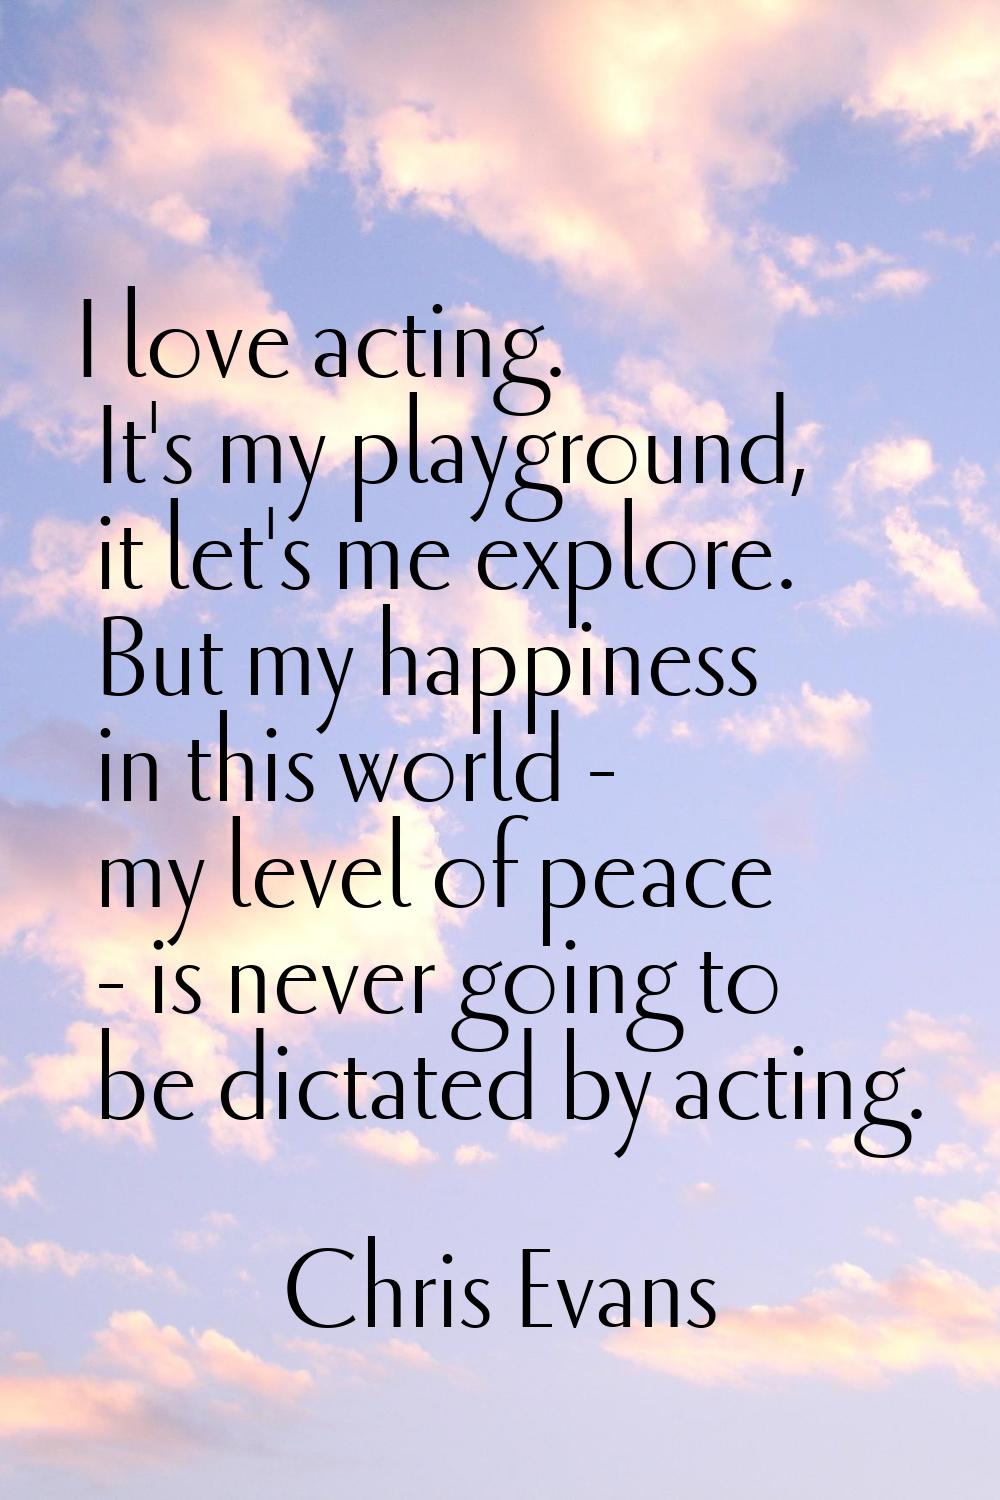 I love acting. It's my playground, it let's me explore. But my happiness in this world - my level o